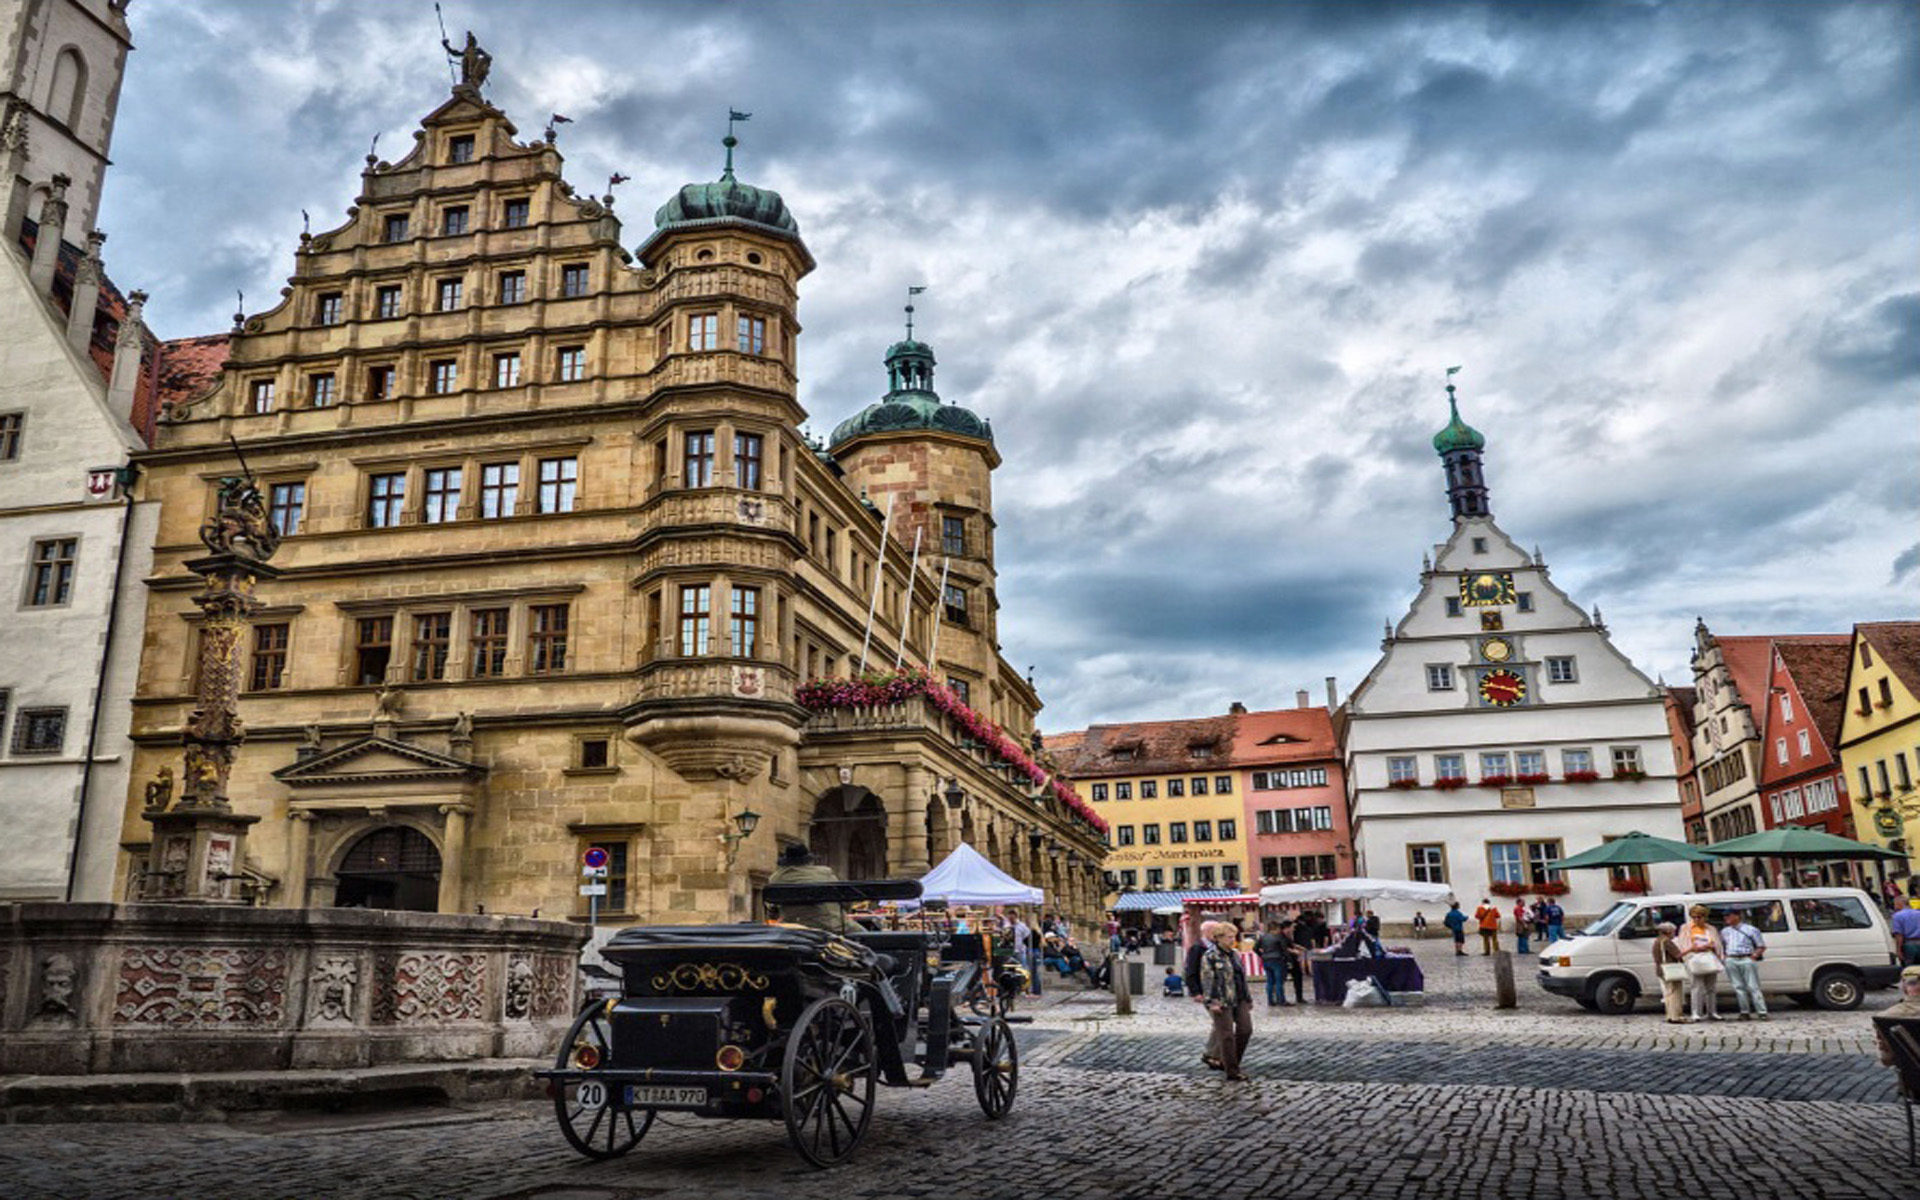 City Square: Rothenburg's center - Market Plaza and Town Hall Tower, A popular old medieval town in Germany. 1920x1200 HD Background.